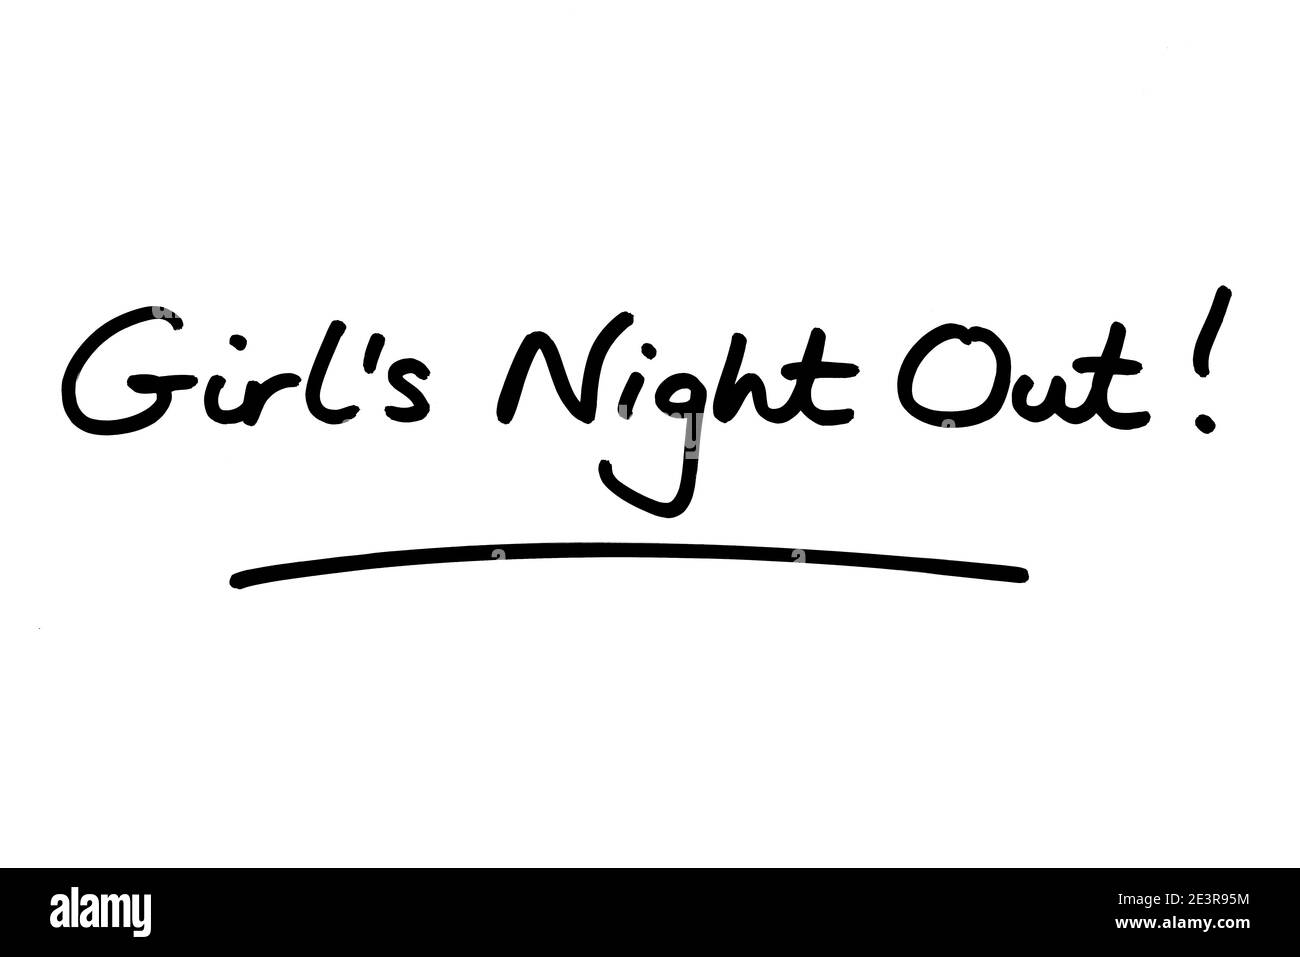 Girls Night Out! handwritten on a white background. Stock Photo